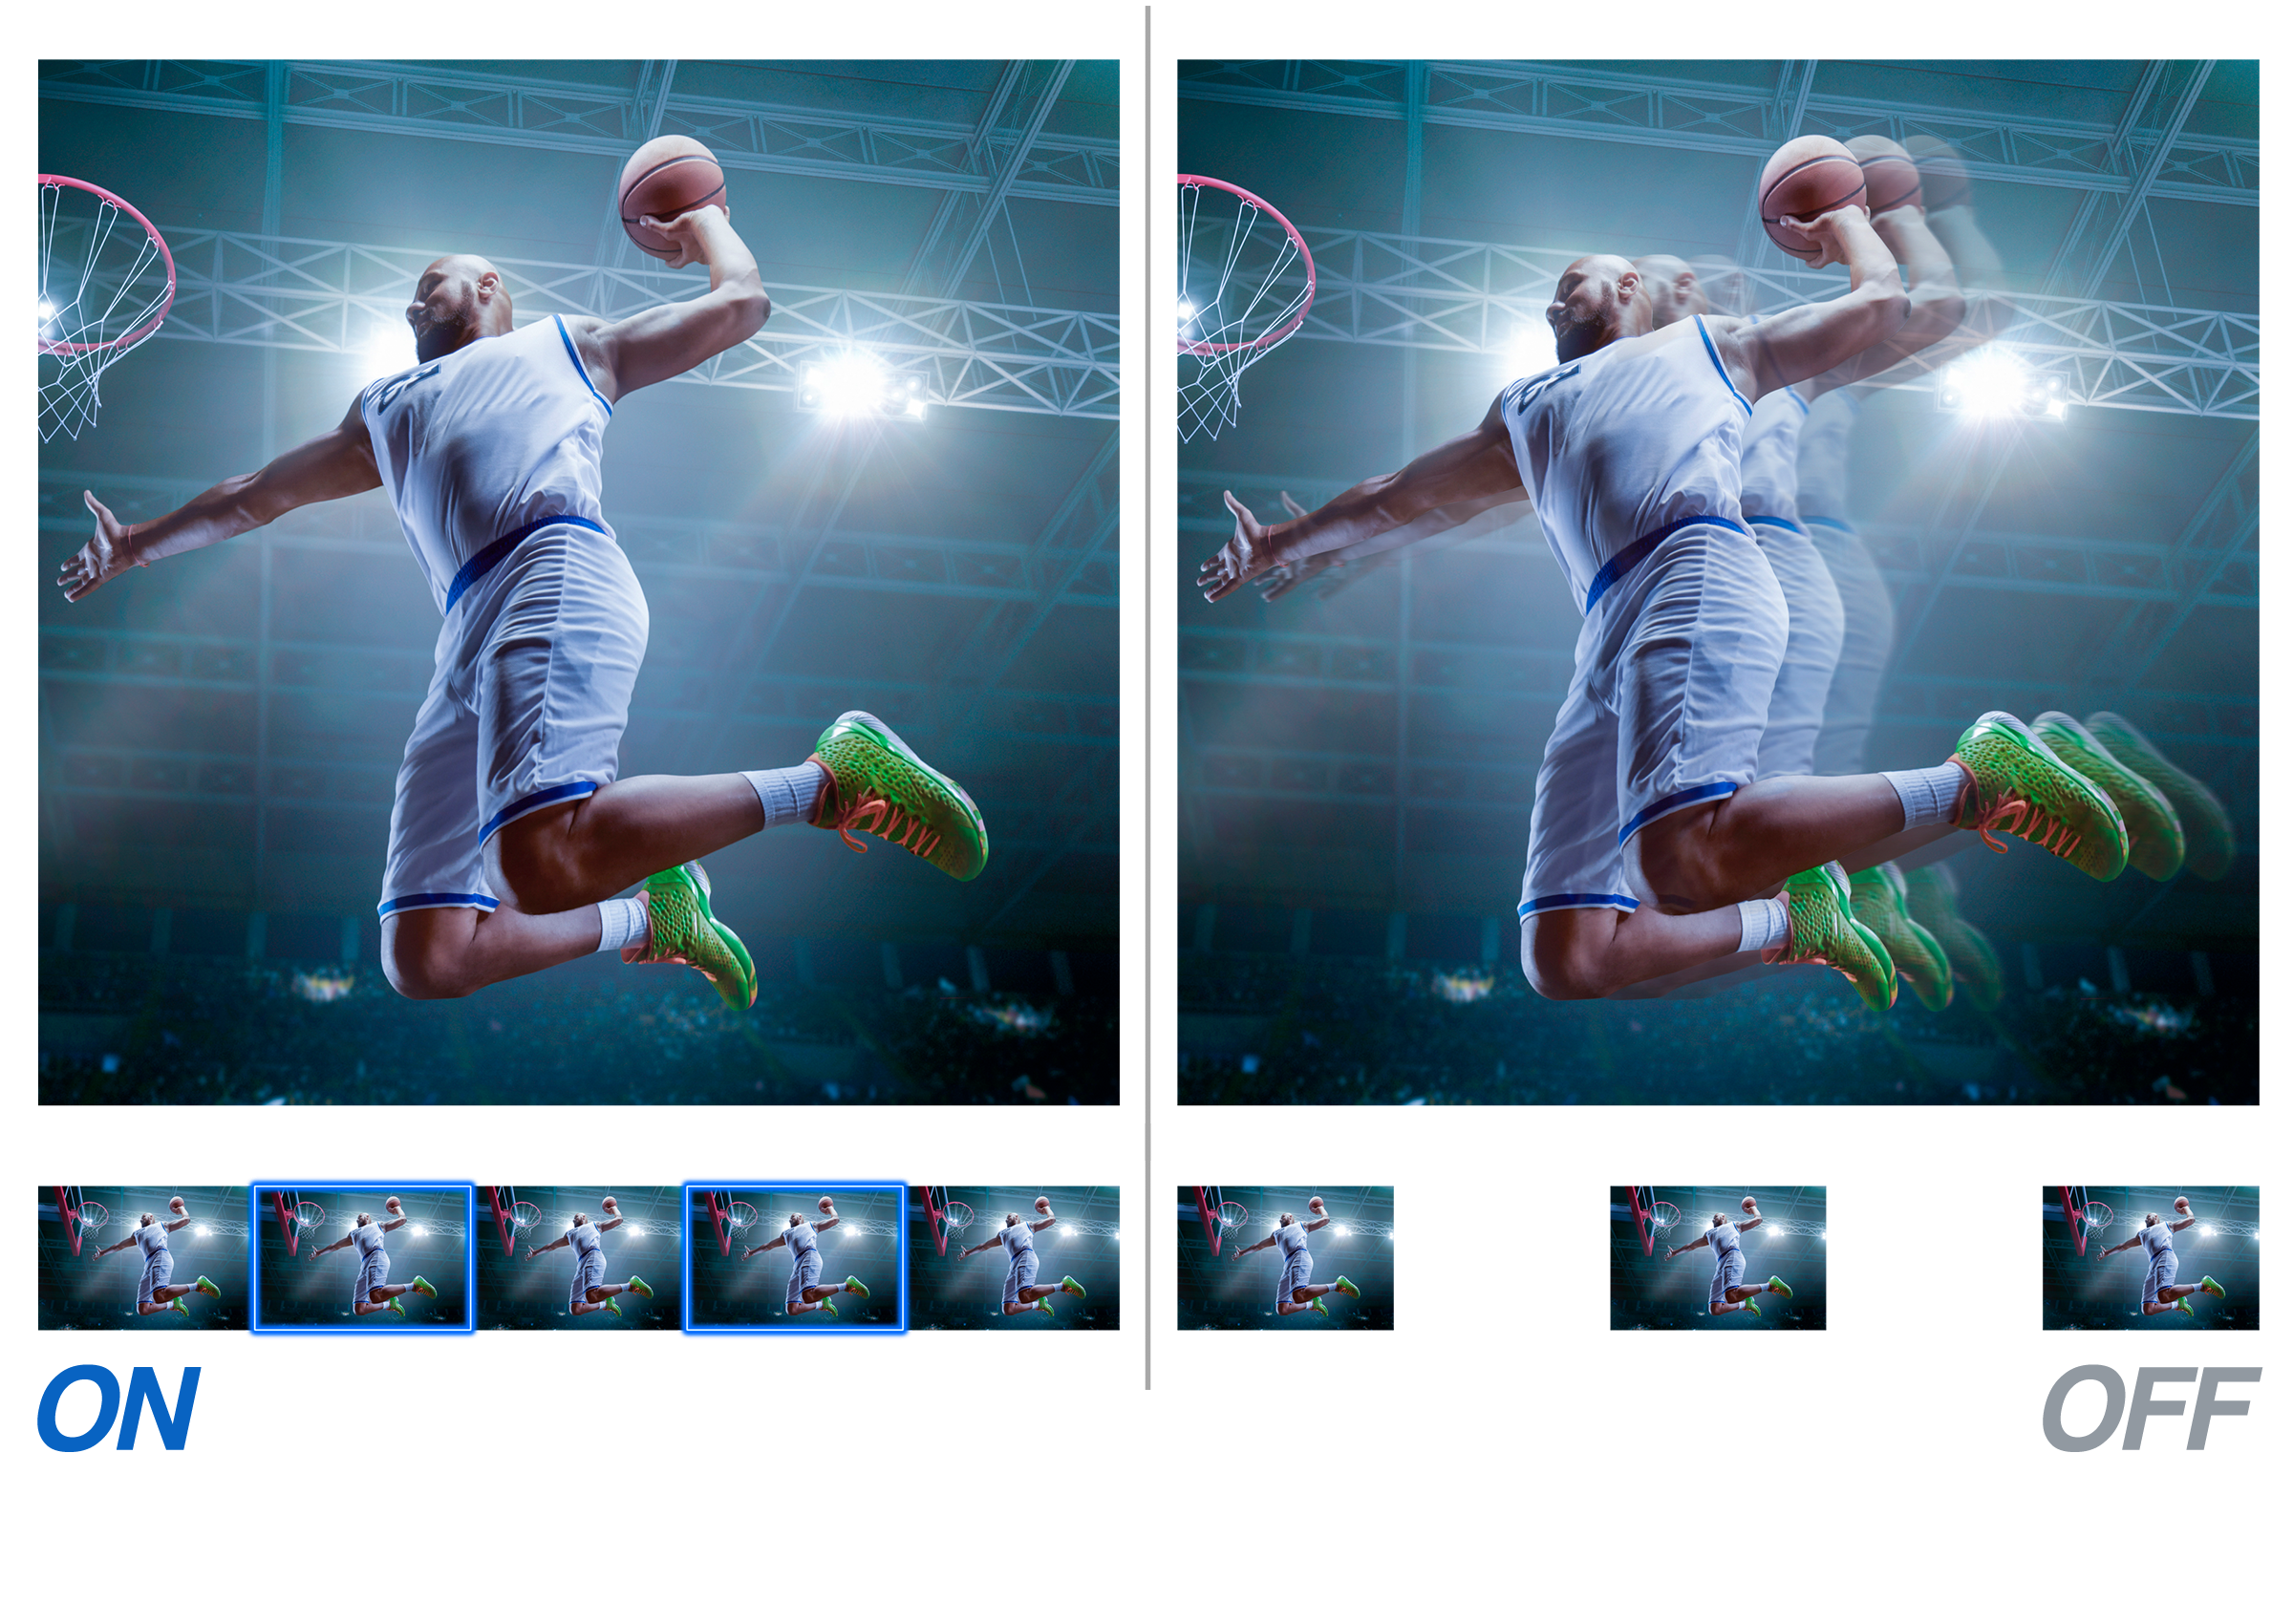 Projection of a basketball player dunking the ball, demonstrating the result of advanced digital picture processing. Images simulated.